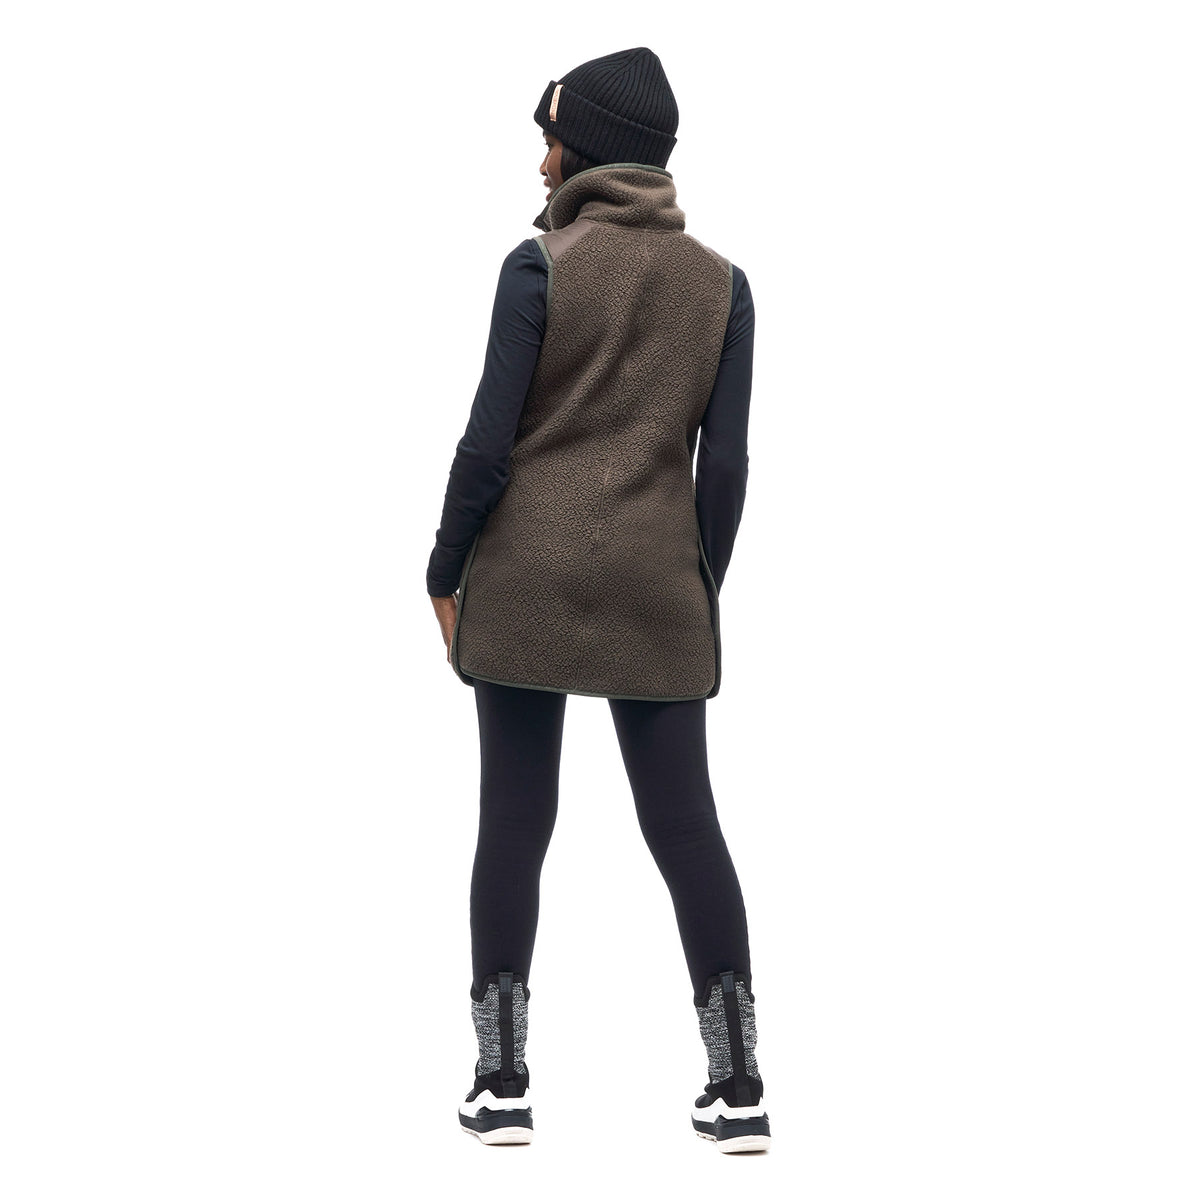 Image features a back facing photo of a model wearing the Indyeva Pecora Tunic in mocha with black leggings and a black beanie.